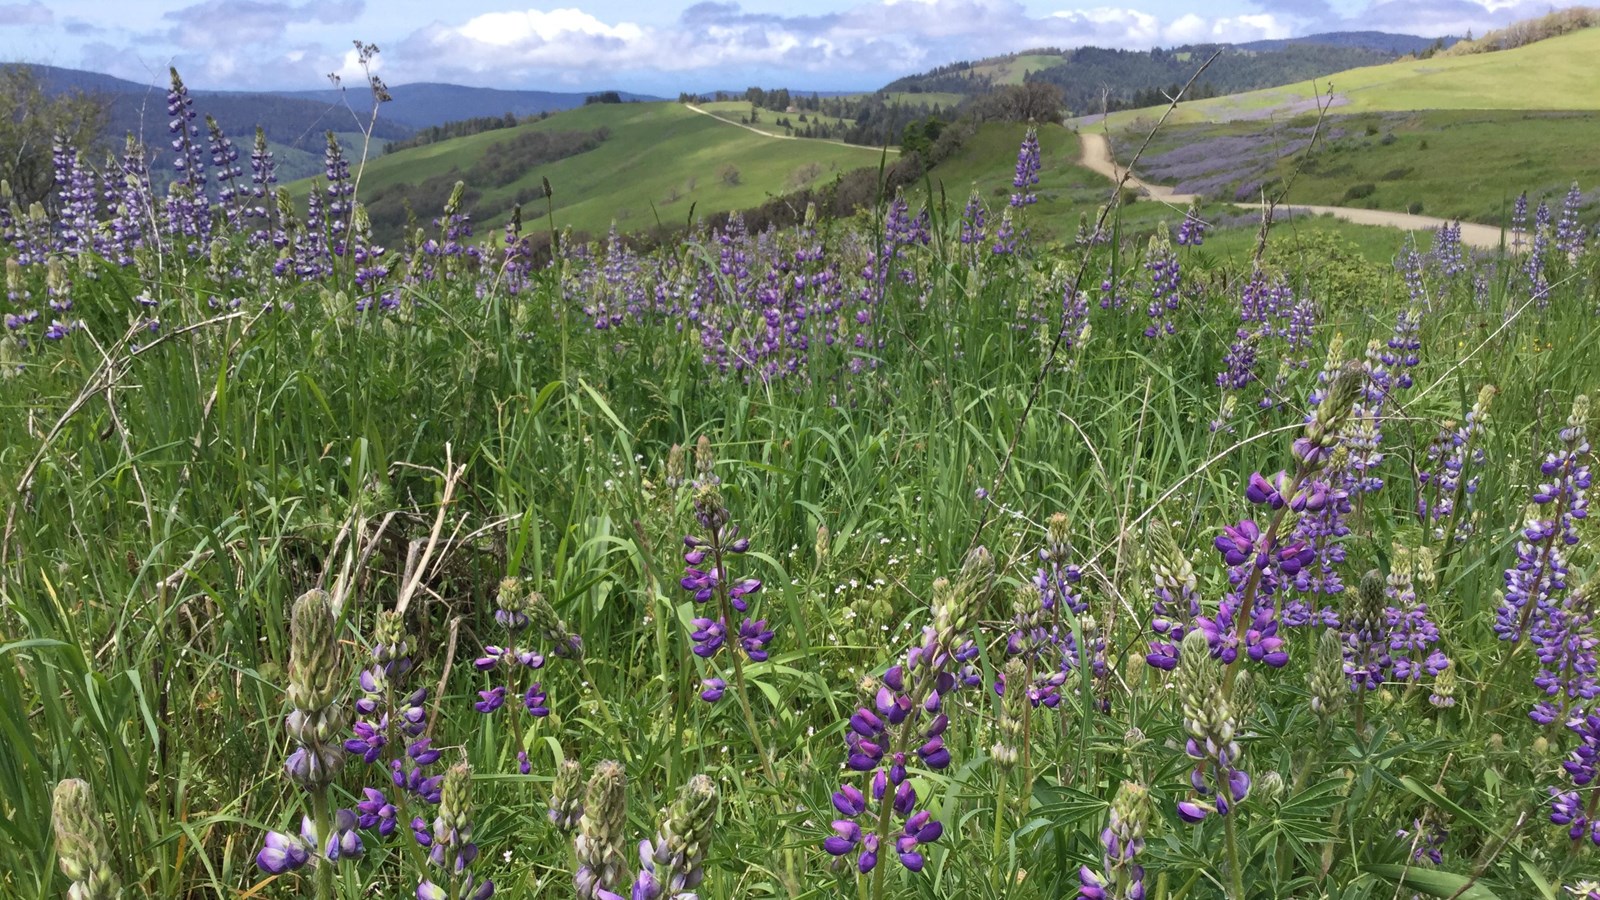 Purple flowers cover a green hillside. A dirt road is in the distance.